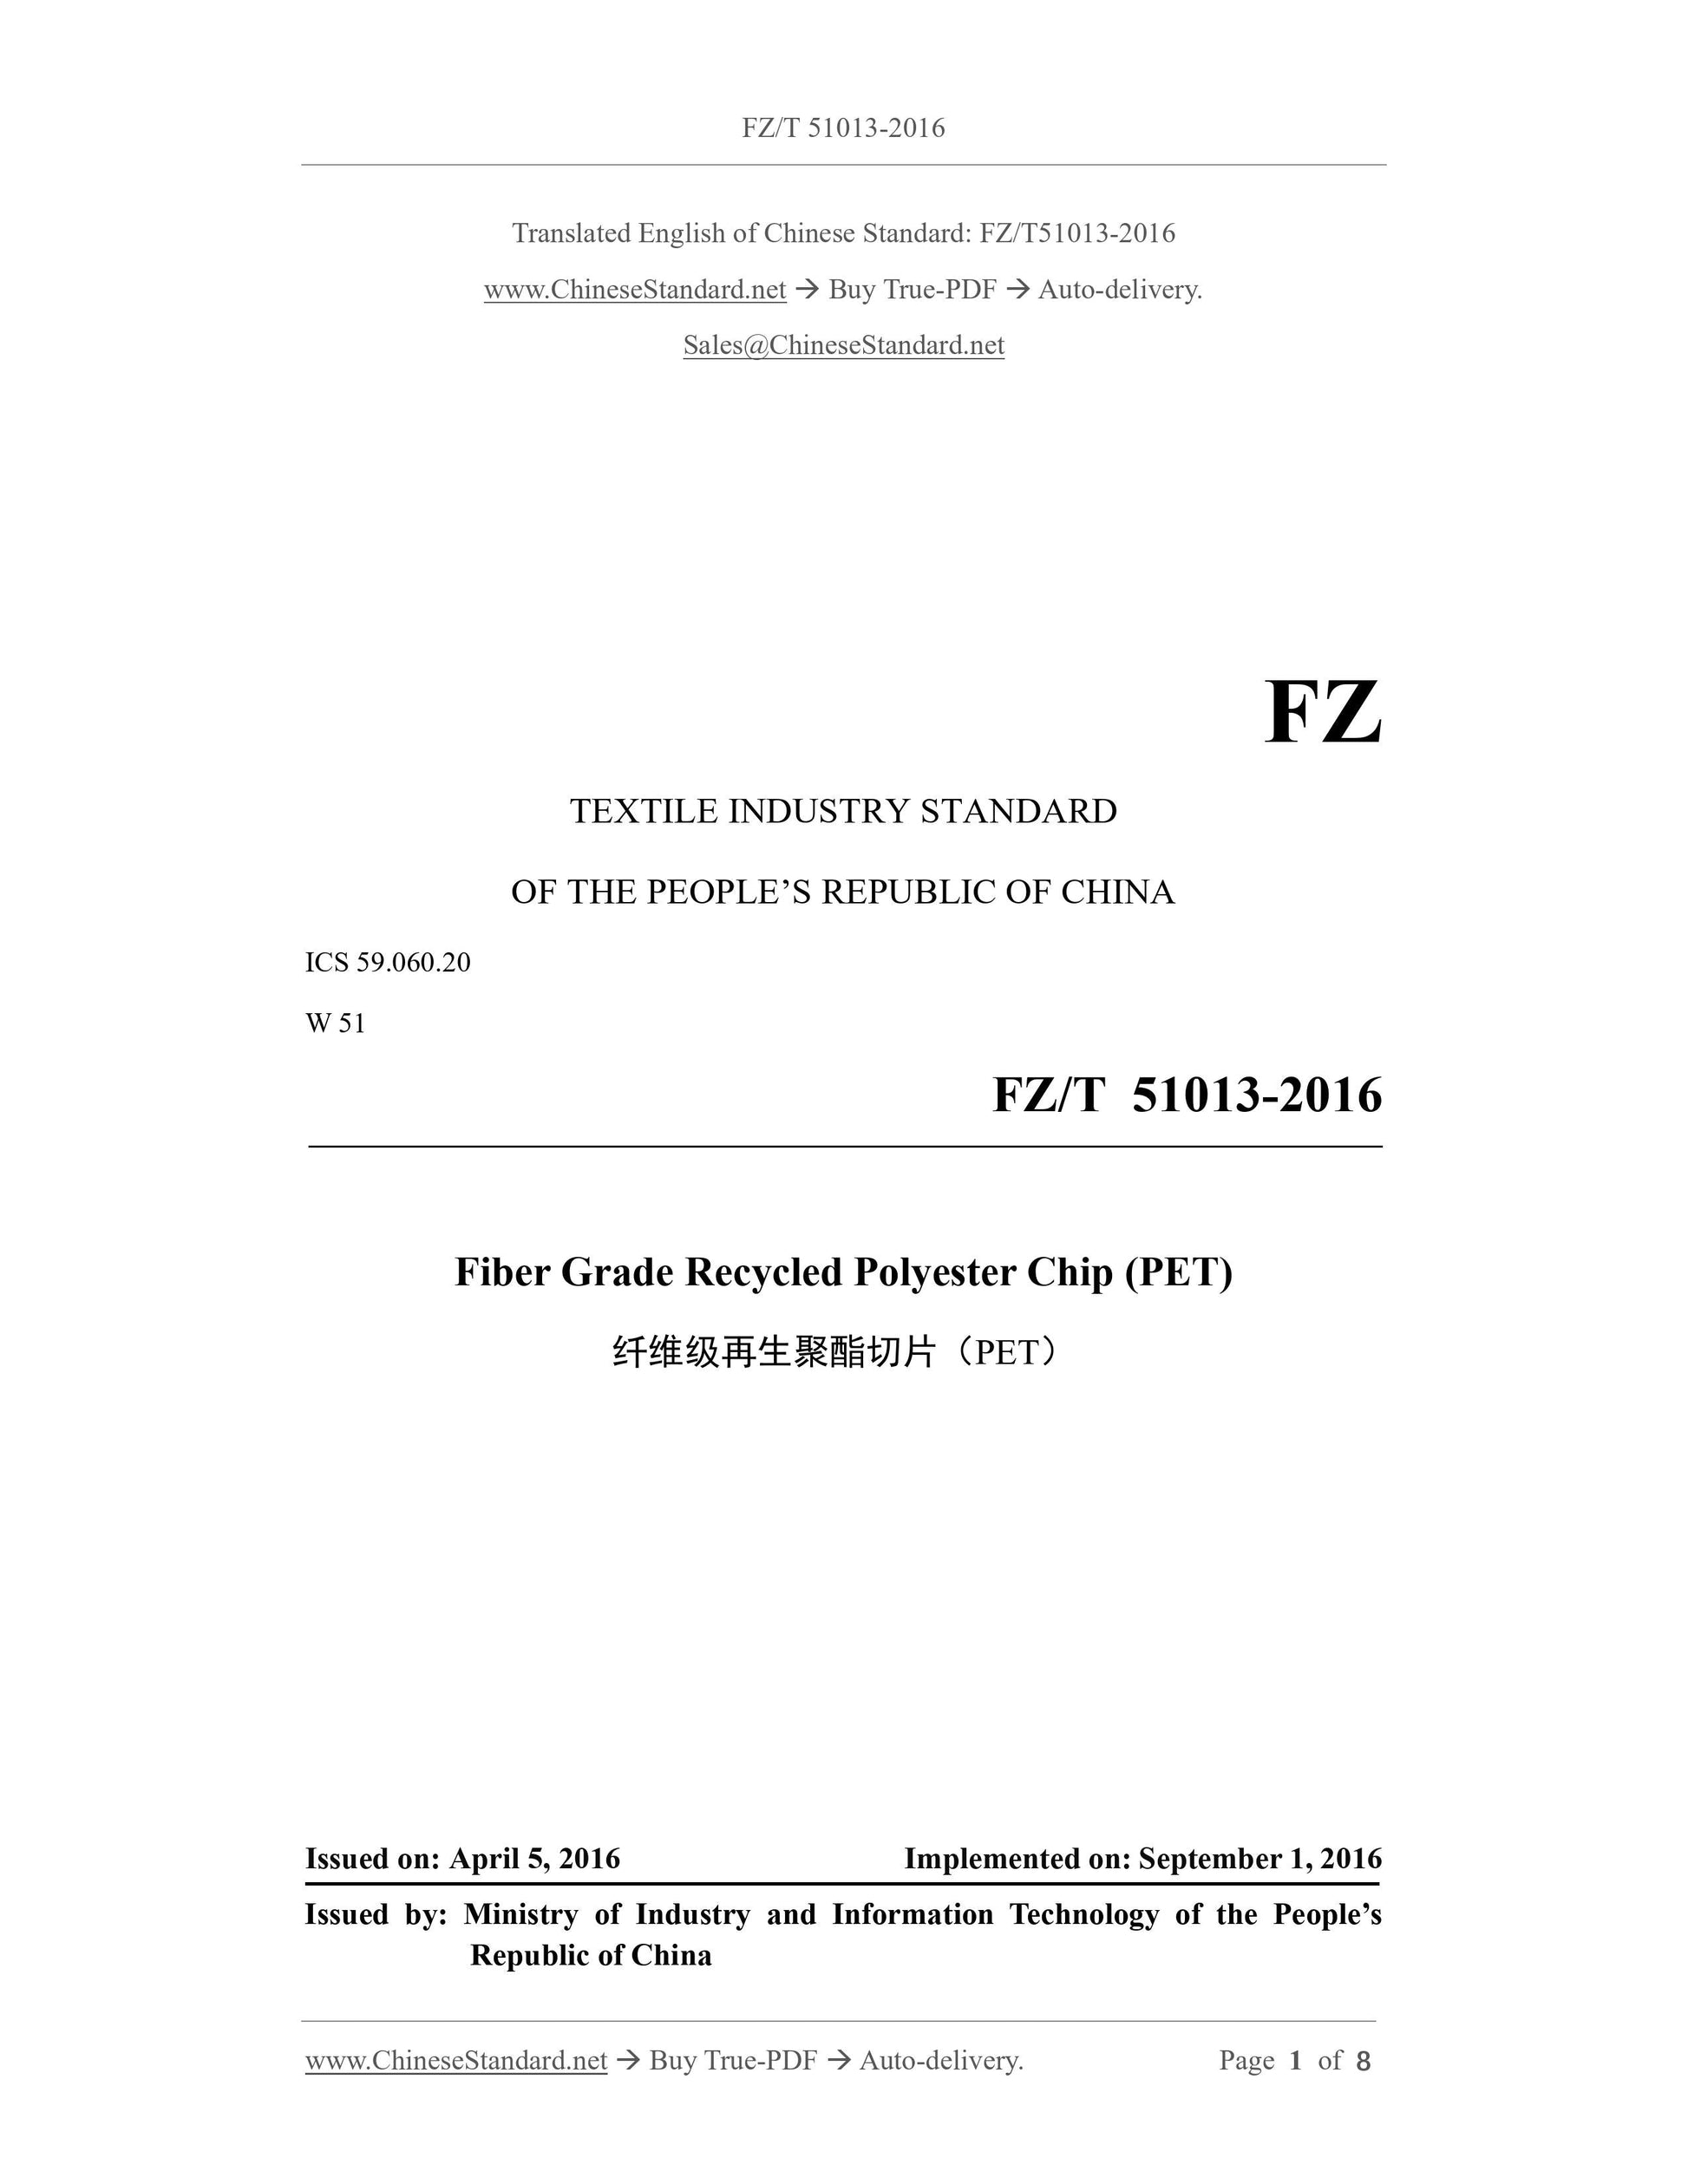 FZ/T 51013-2016 Page 1